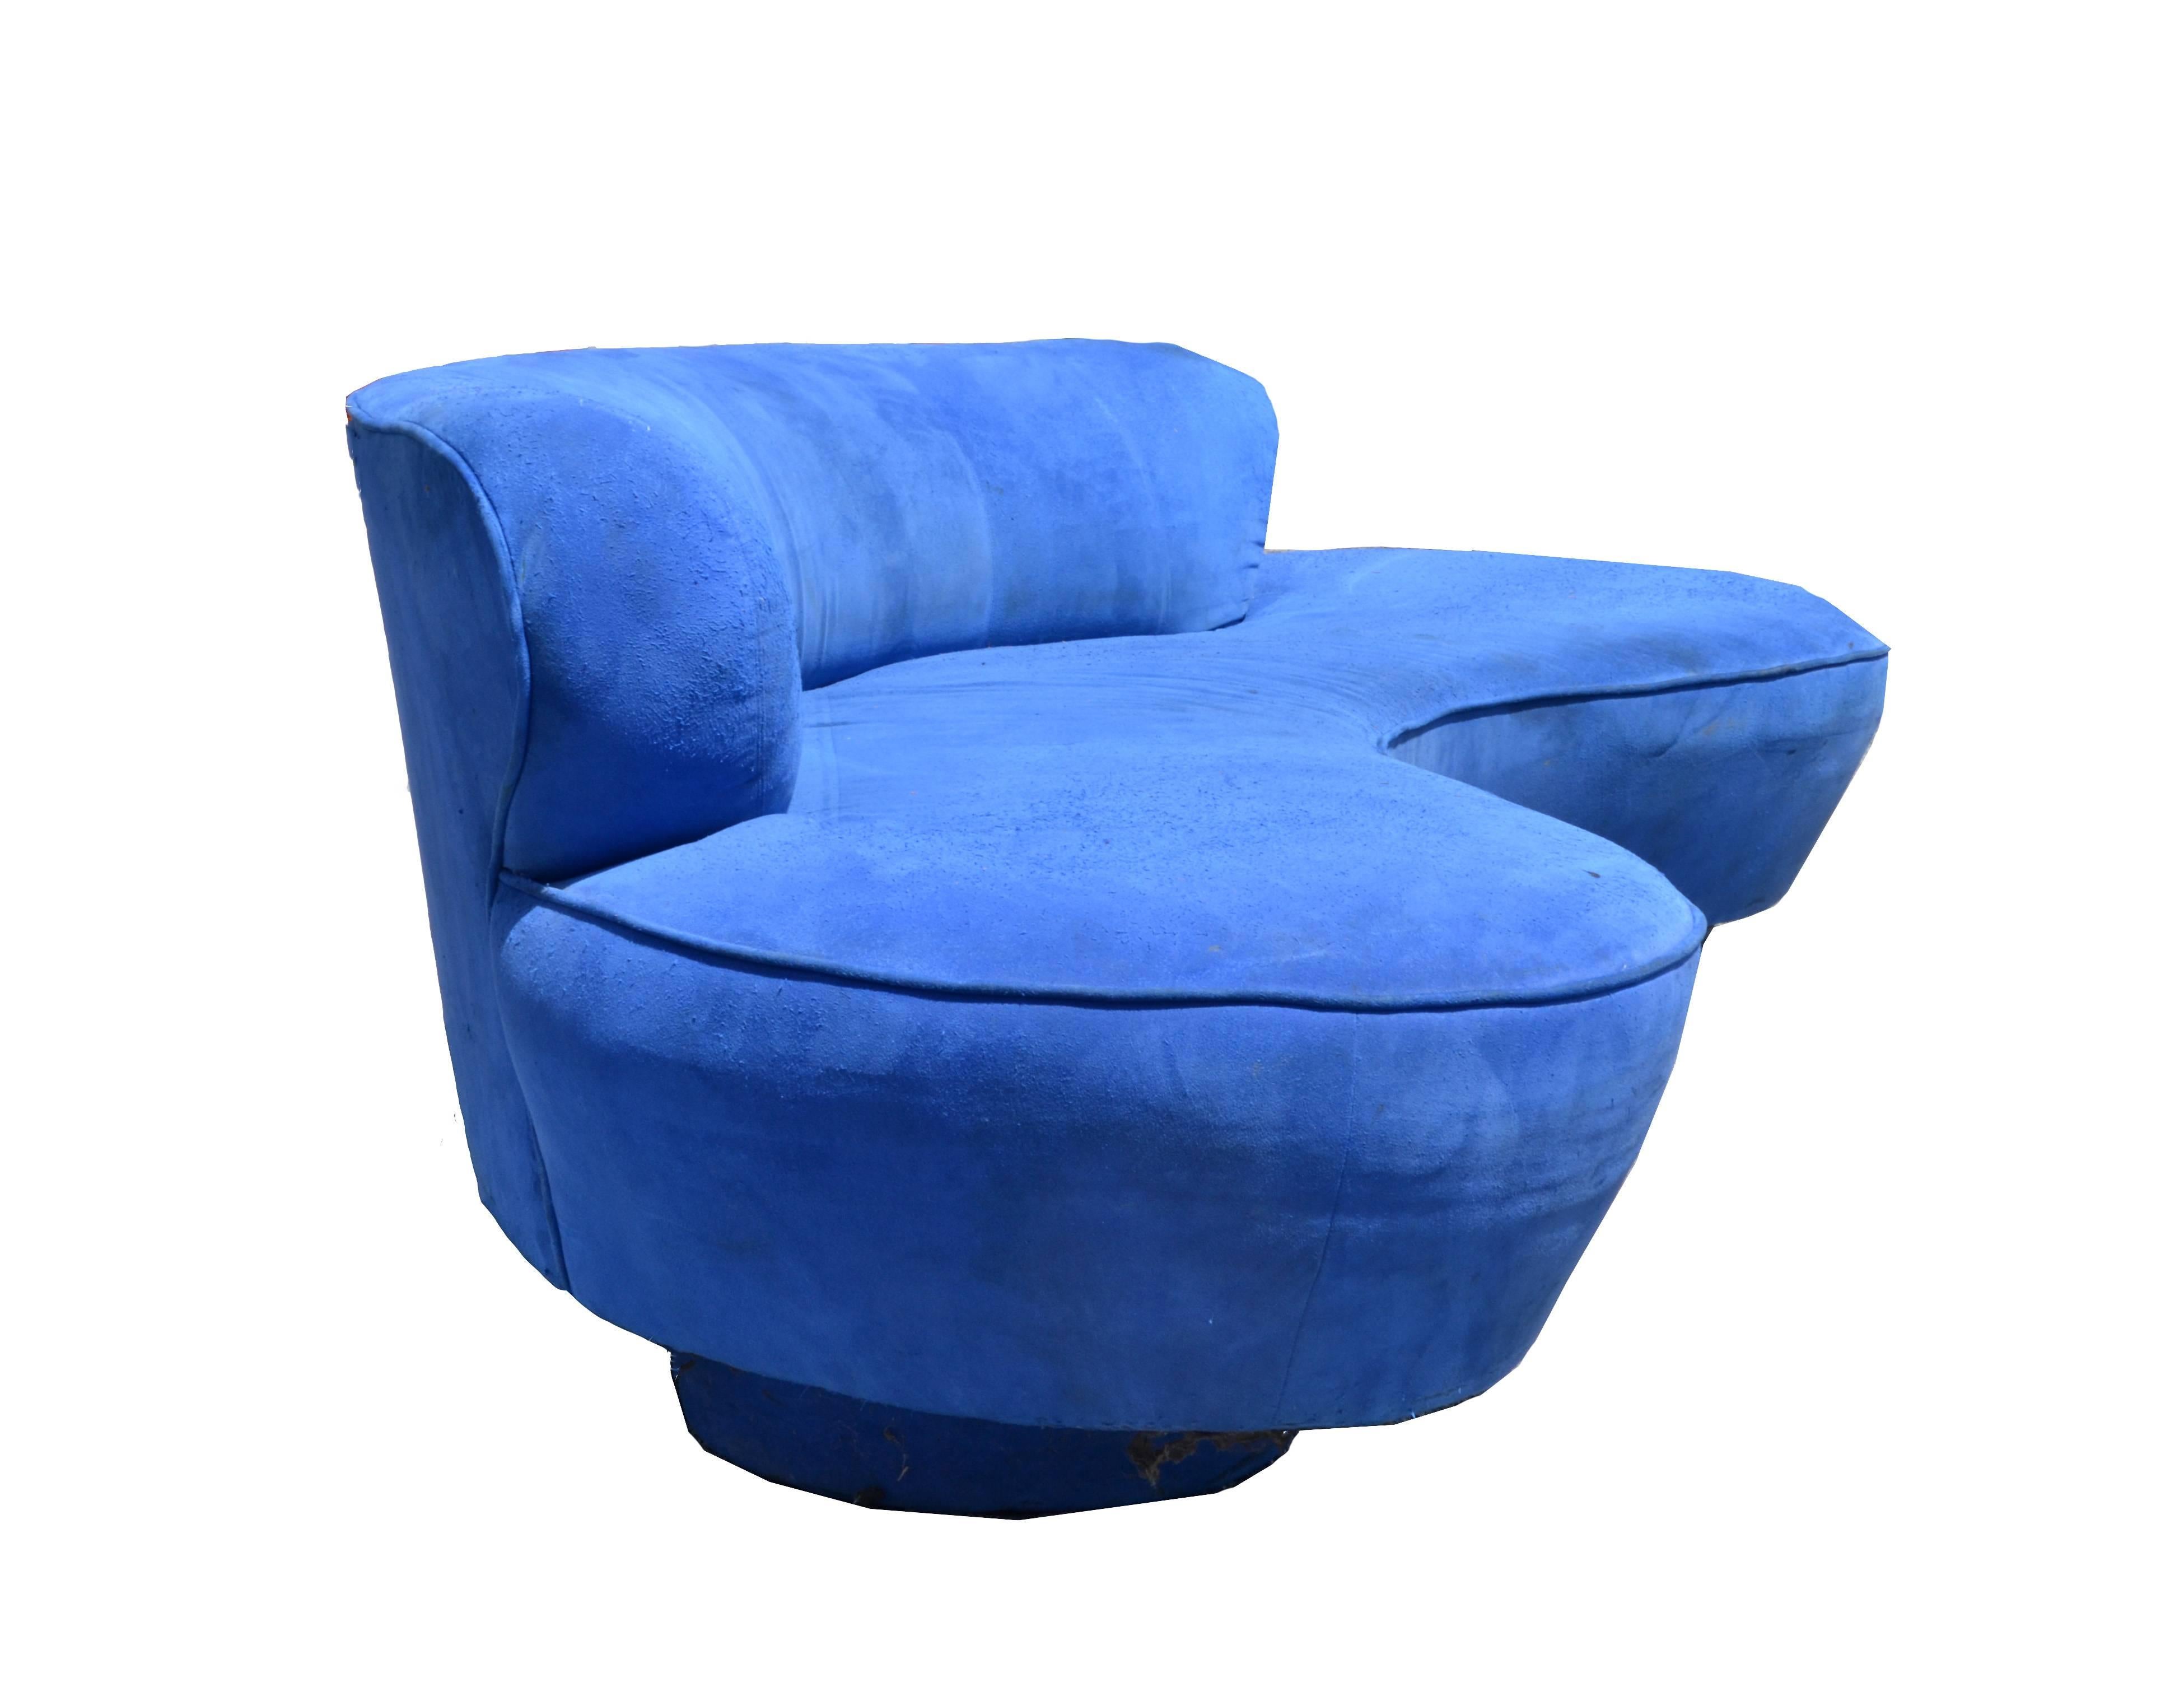 Original Vintage Vladimir Kagan Cloud Serpentine sofa in blue microfiber by Directional Furniture Company.
Original label underneath, Directional, Made in USA.
Note: The sofa needs new foam and new upholstery. We can reupholster this sofa for you